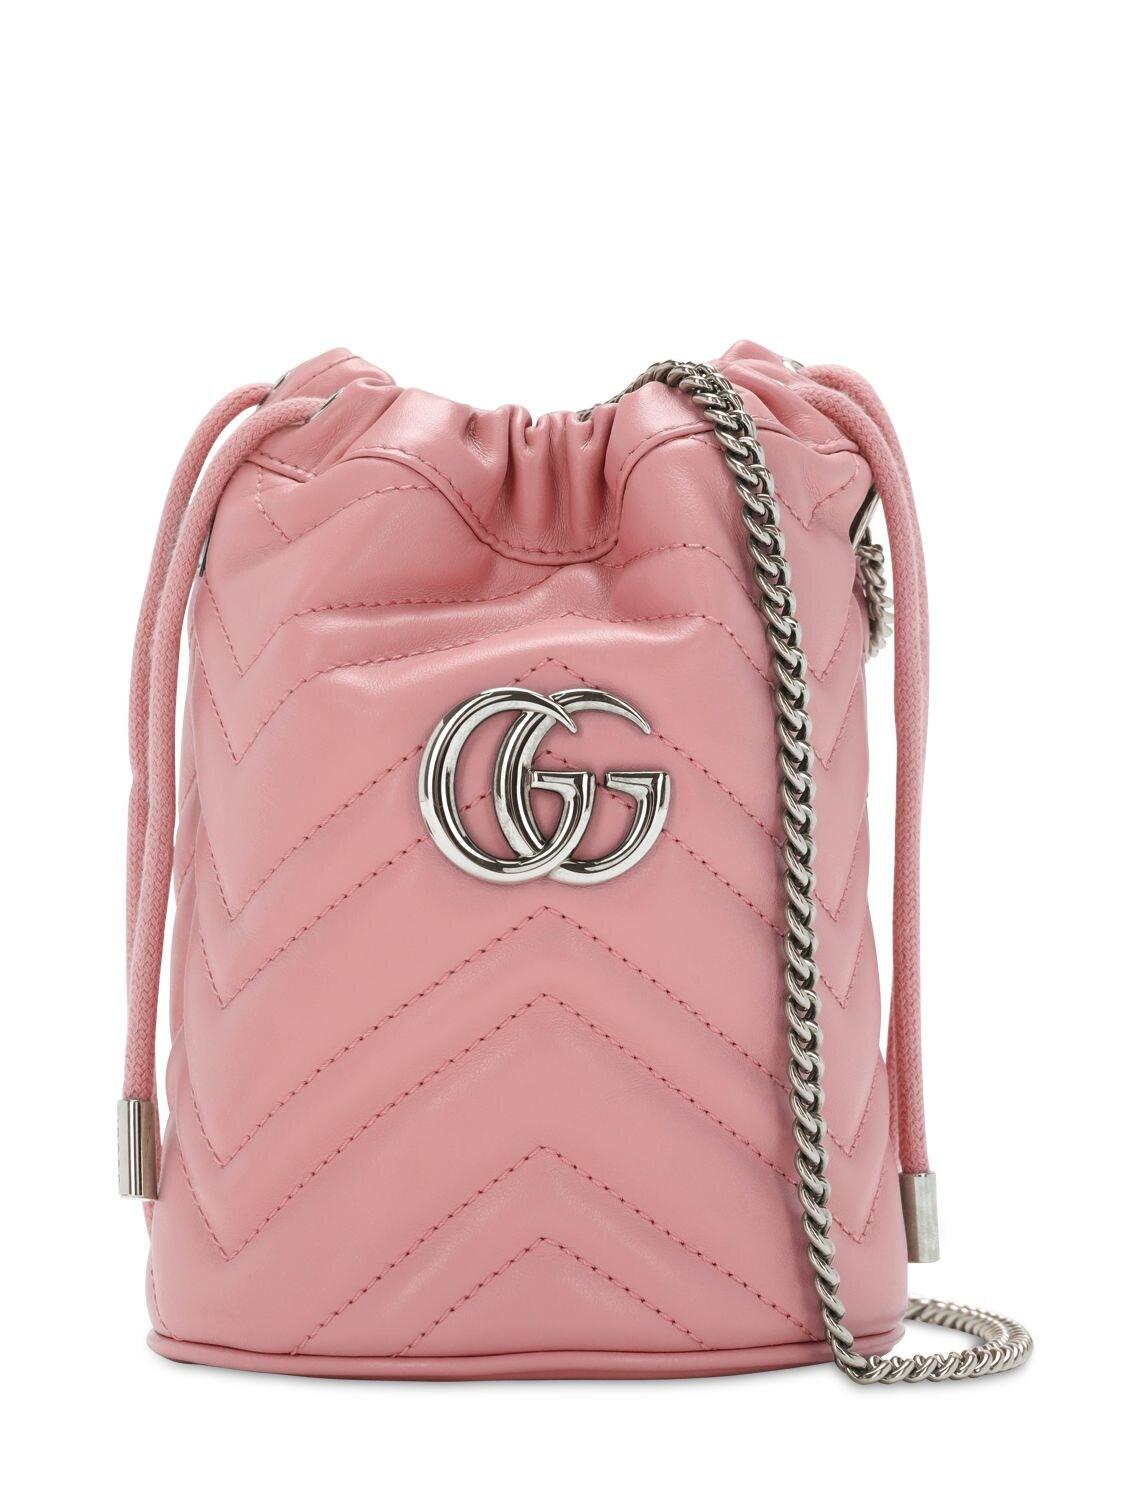 Gucci Mini Gg Marmont 2.0 Leather Bucket Bag in Pink - Lyst